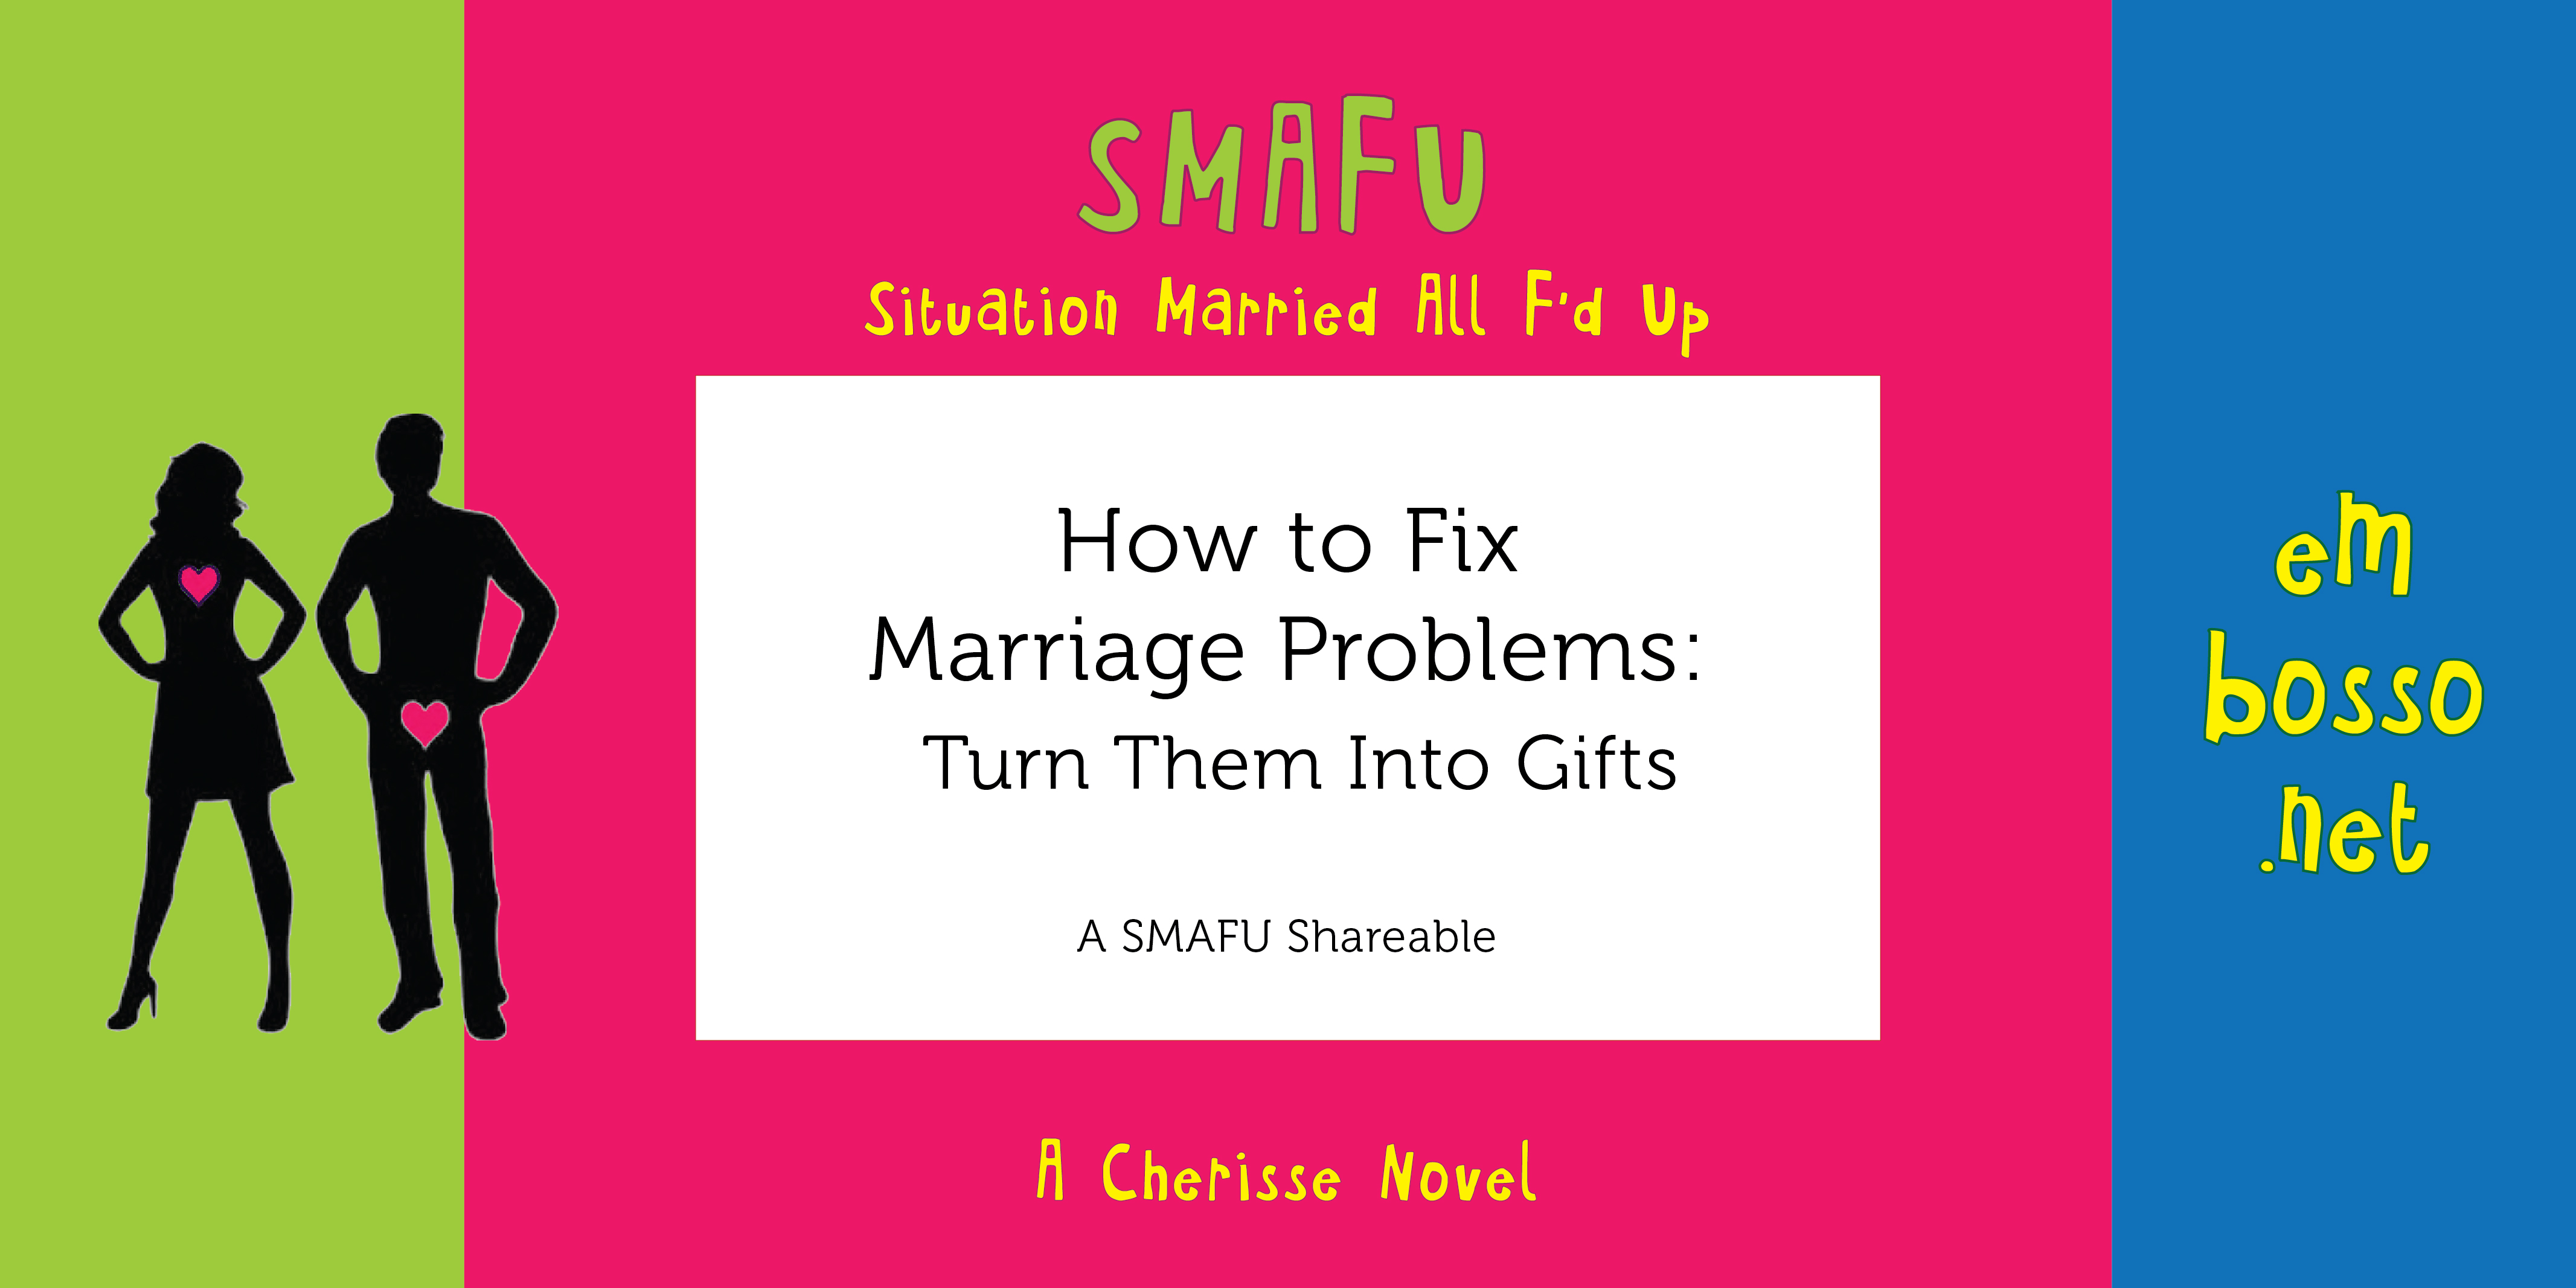 Image of SMAFU book cover for shareable, "How to Fix Marriage Problems - Turn Them into Gifts"